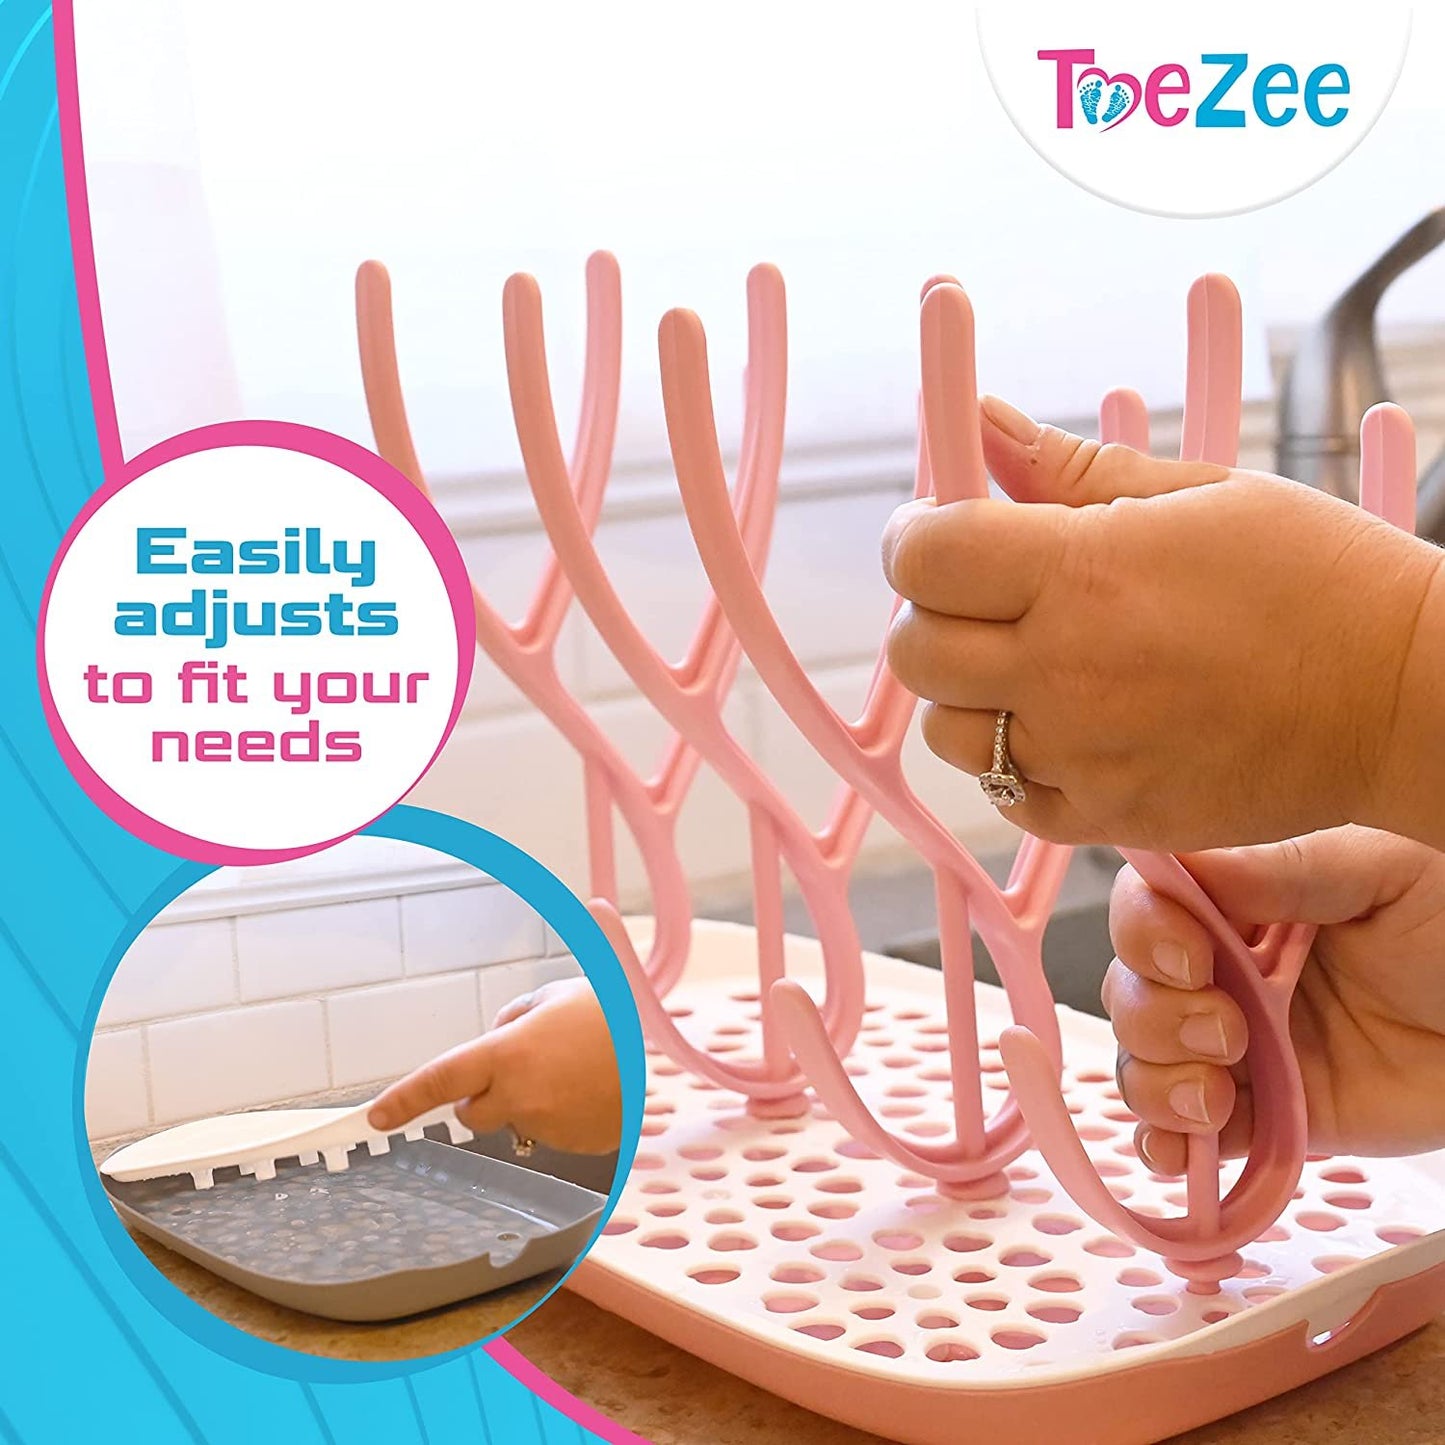 ToeZee Baby Bottle Drying Rack Space Saving Countertop Baby Bottle Holder, Drying Rack for Baby Bottles Accessories - Stores Up to 12 Bottles, Dishwasher Safe (Gray)